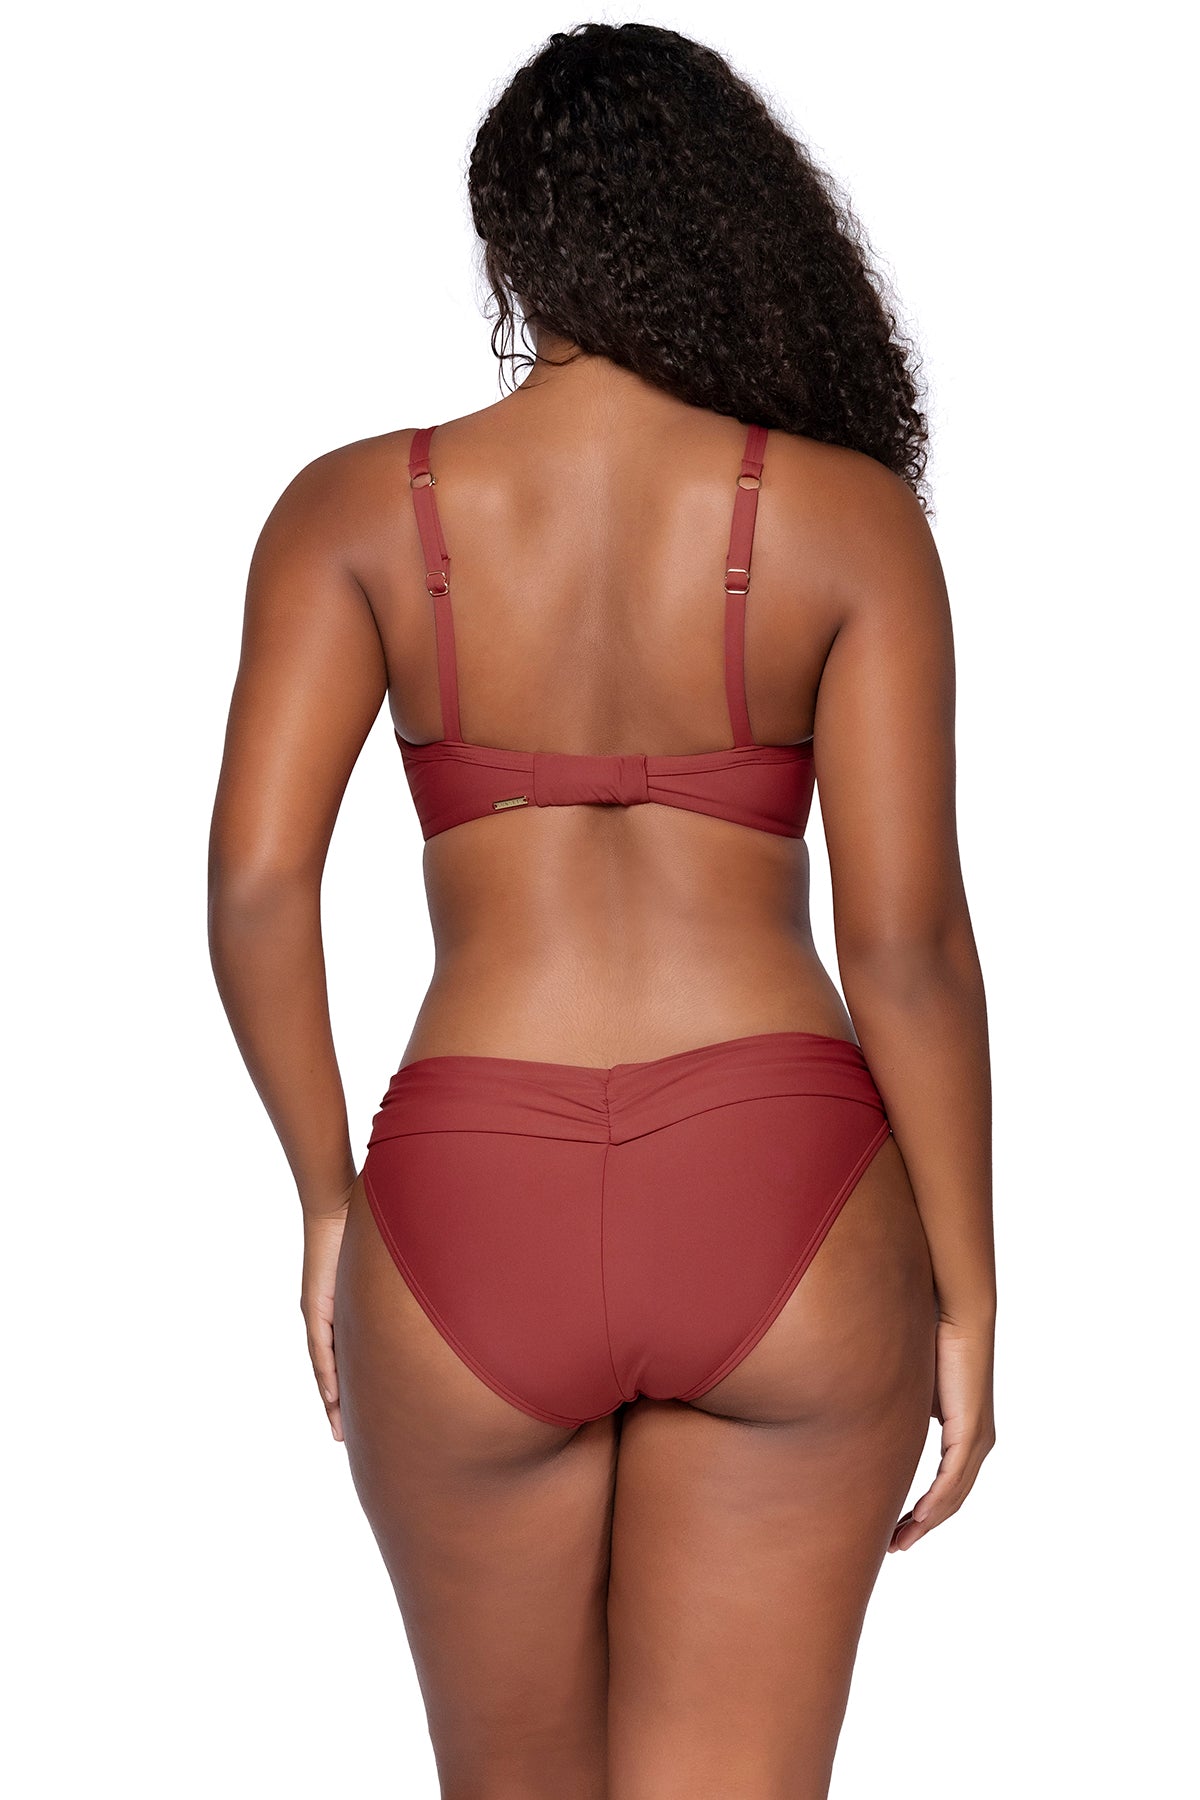 Back view of Sunsets Tuscan Red Crossroads Underwire Top Unforgettable Bottom bikini